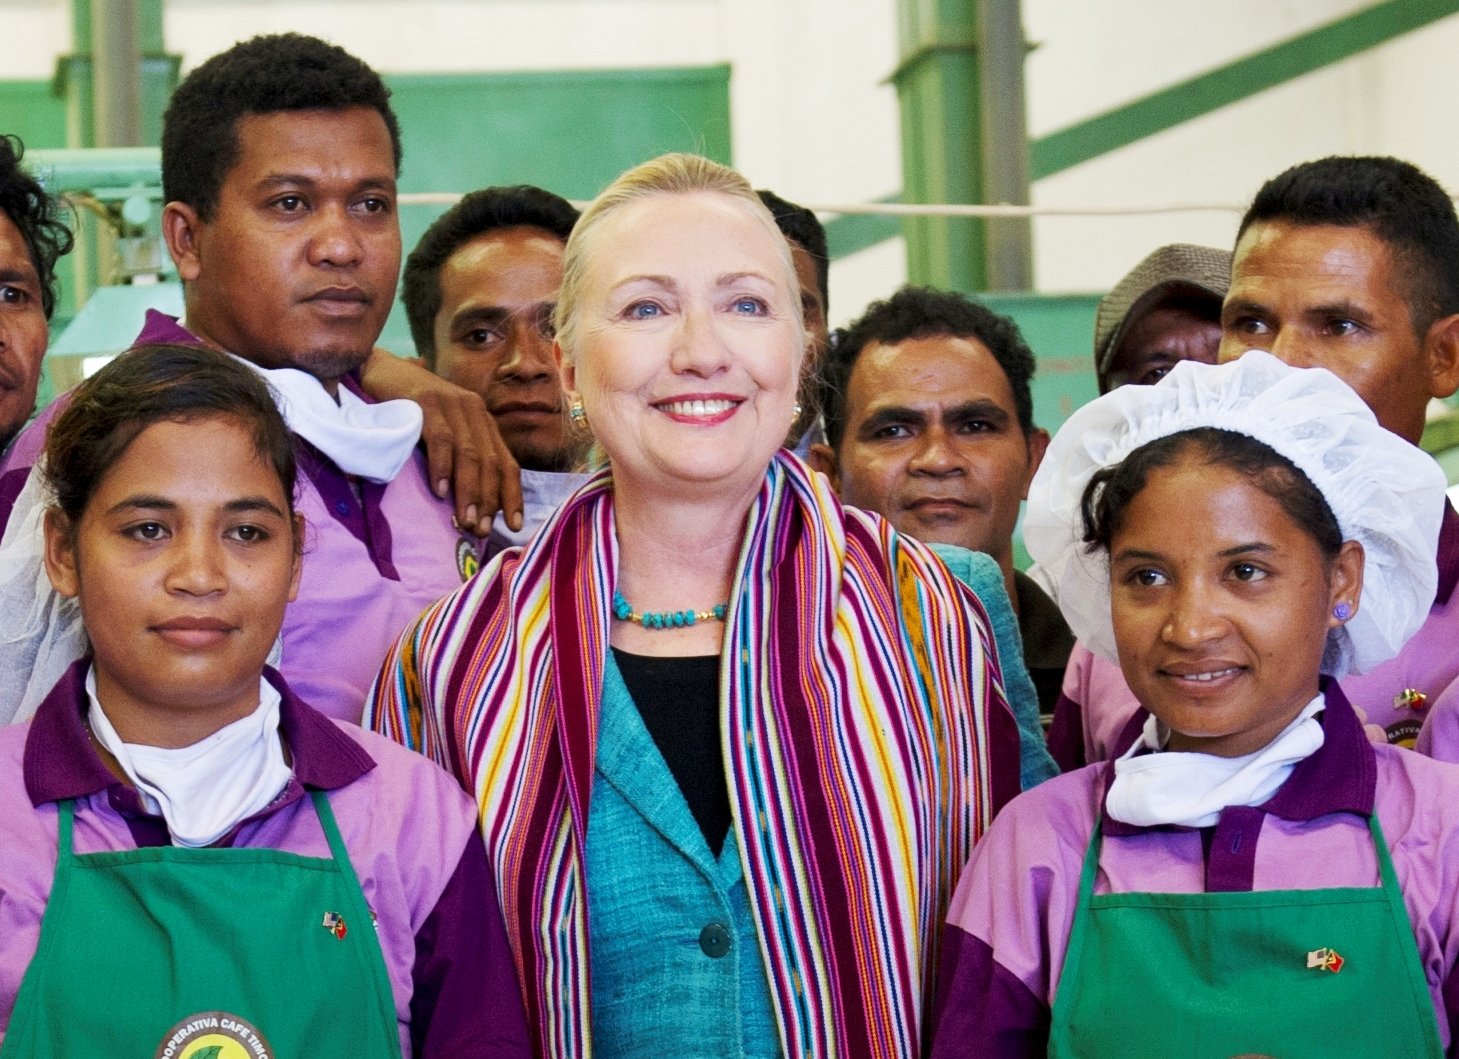 Secretary_Clinton_Smiles_With_Cooperativa_Cafe_Timor_Workers_(7943345404)_(cropped).jpeg